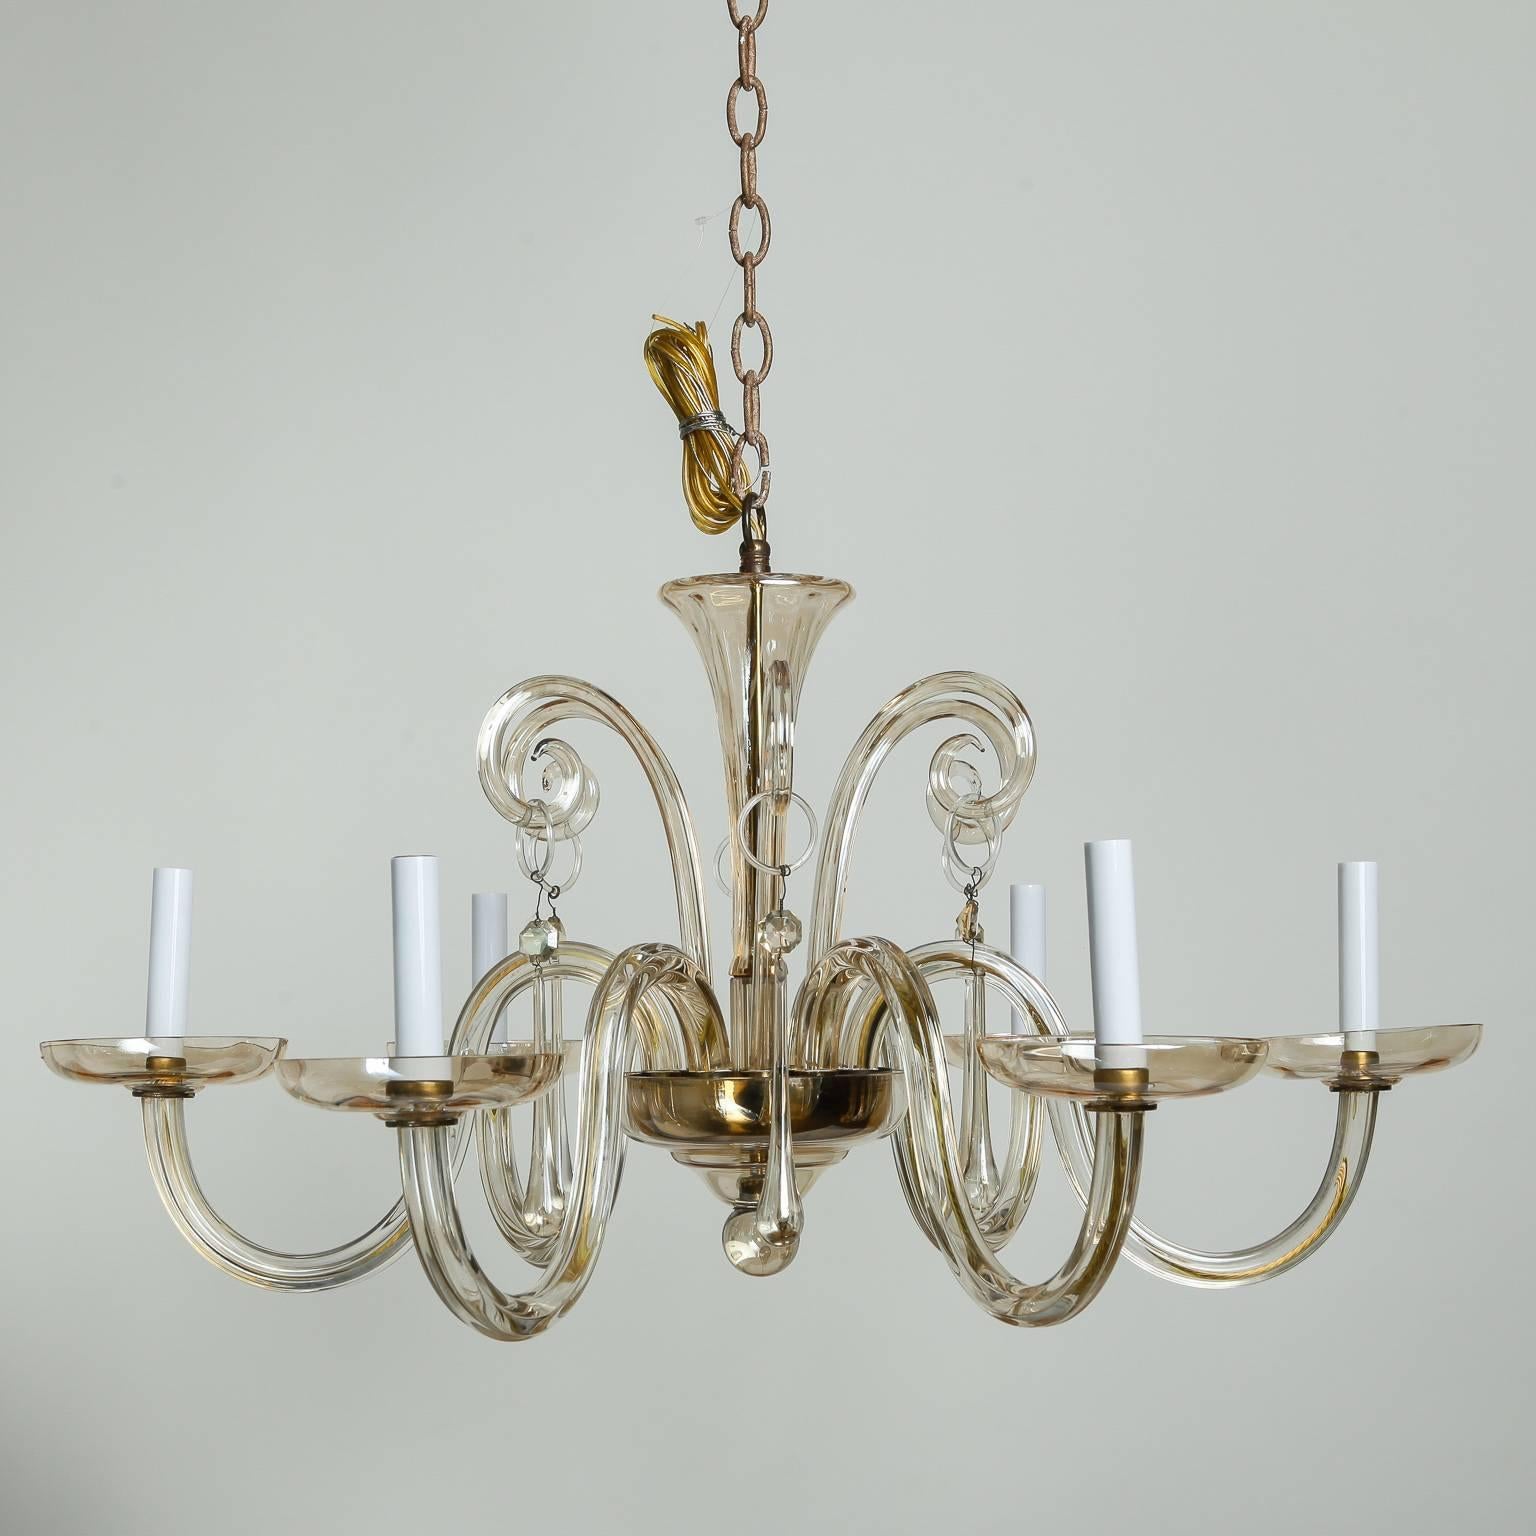 Six-light chandelier in pale amber Murano glass, circa 1960s. Sleek, clean lines with glass center shaft and bobeches and candle style lights. New wiring for US electrical standards.